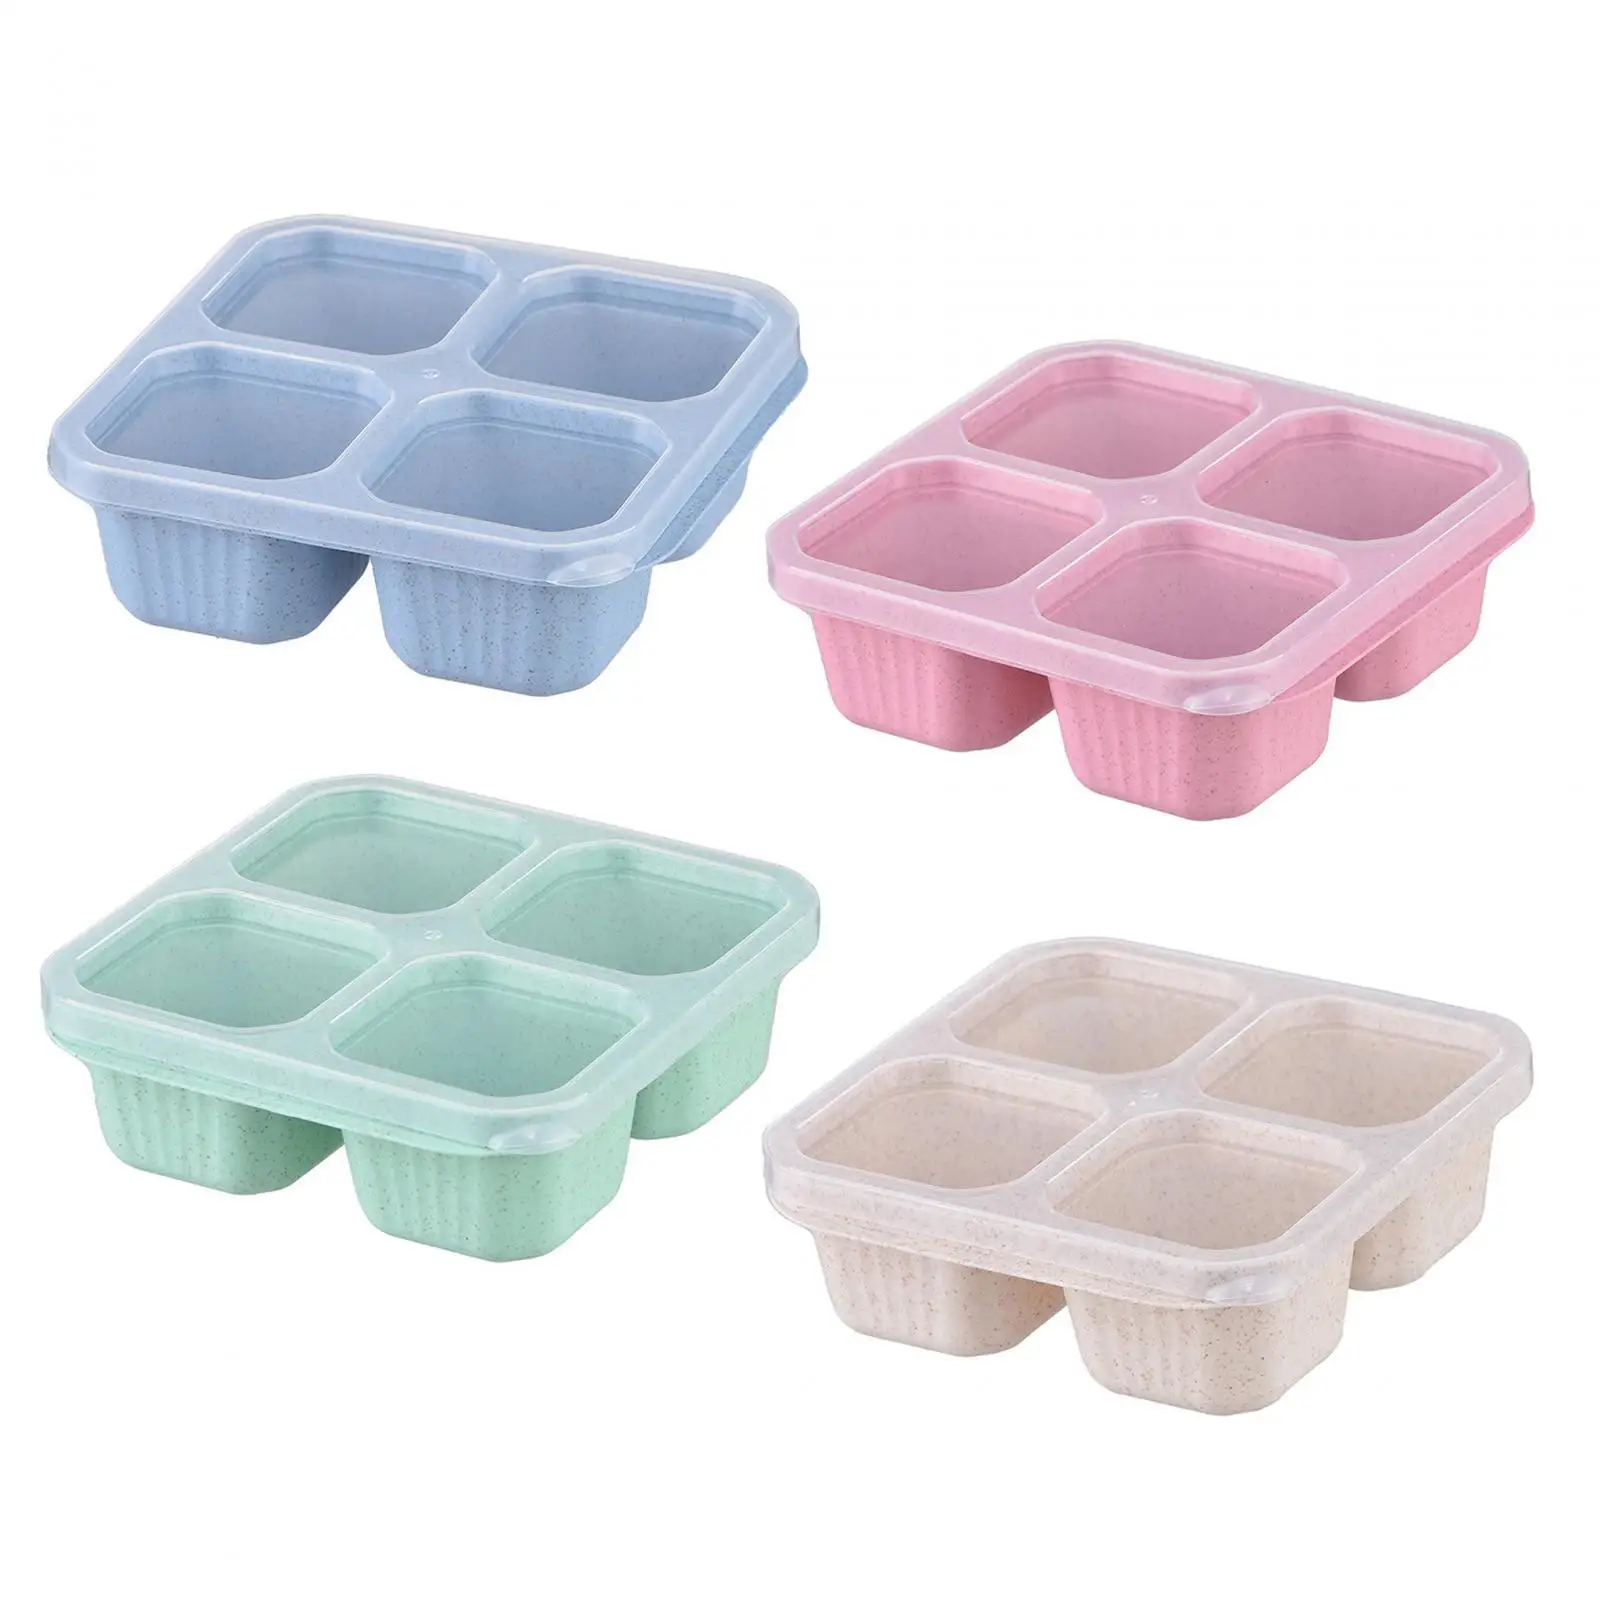 Bento Snack Box Travel Work Divided Serving Tray 4 Compartment Containers for Chocolate Candy Dessert Sandwich Dried Fruits